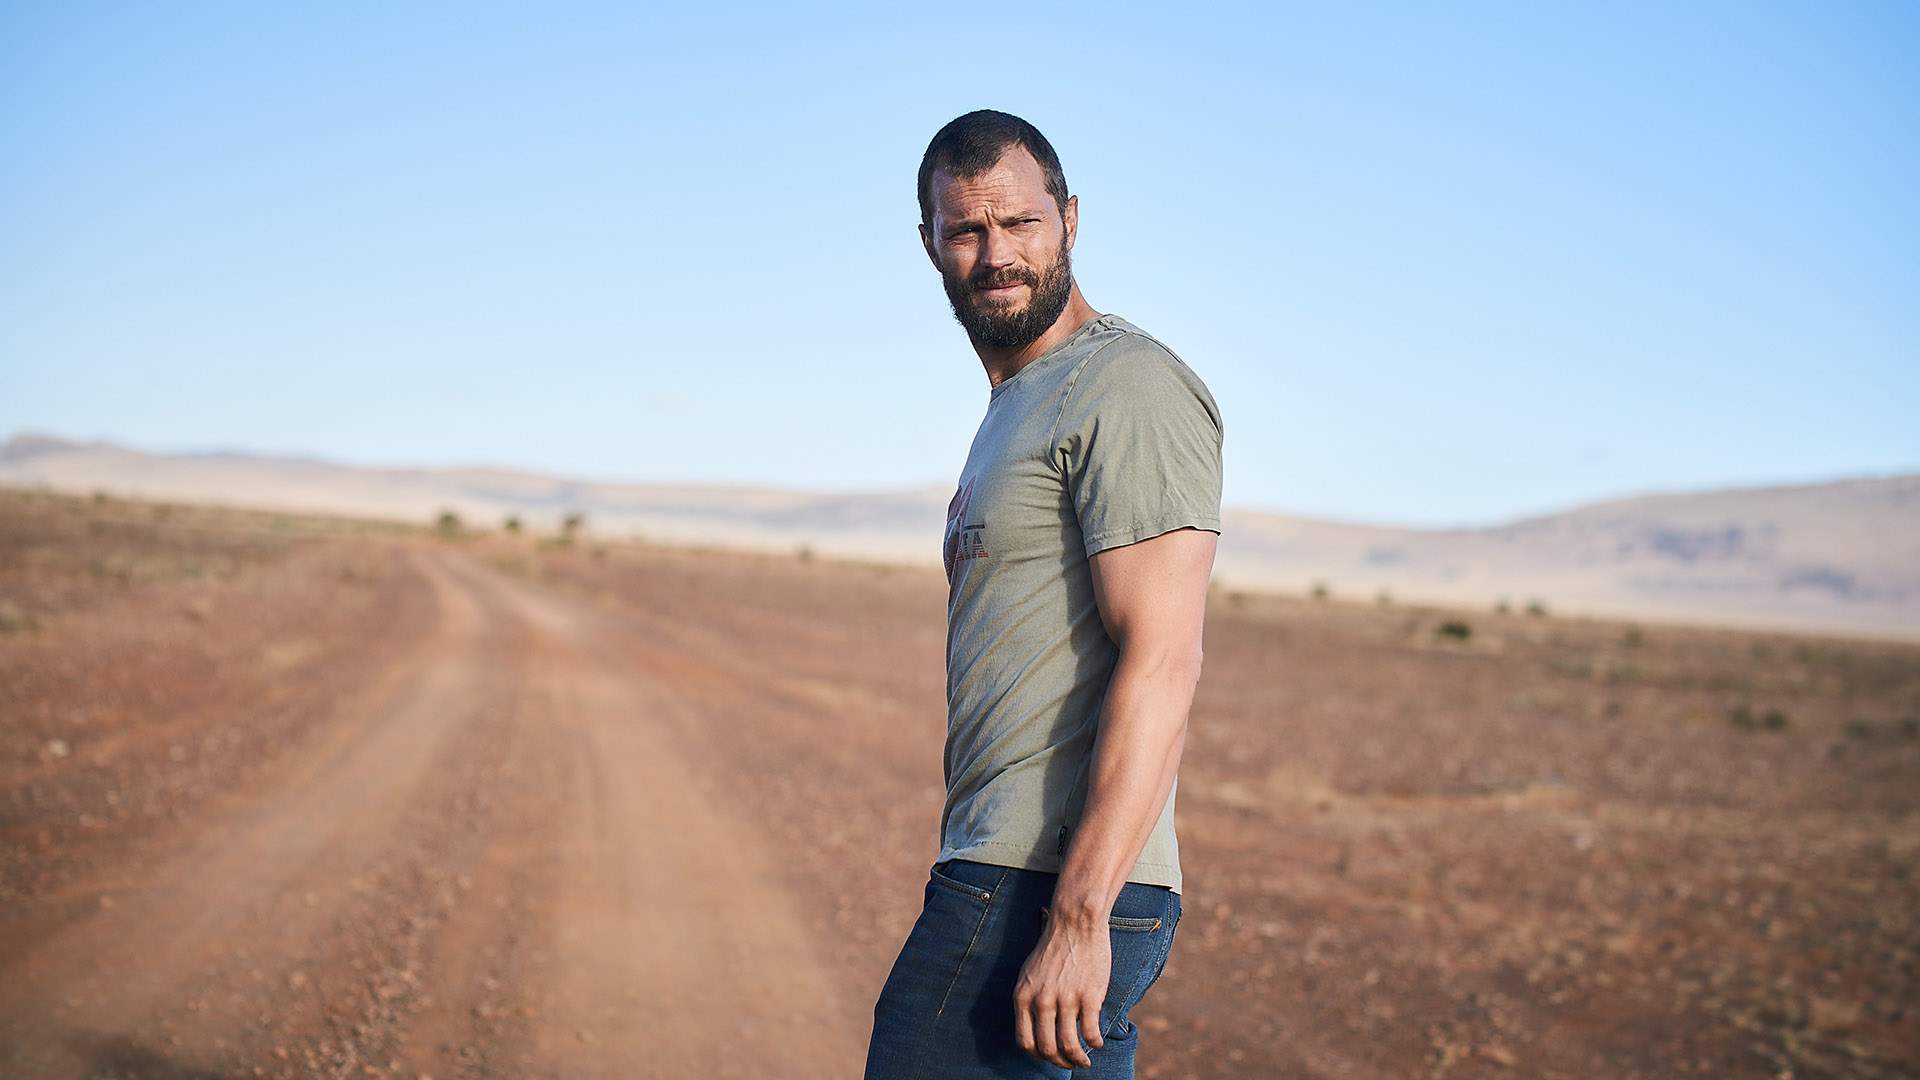 Jamie Dornan Gets Stranded in the Outback in the Trailer for New Stan Thriller Series 'The Tourist'